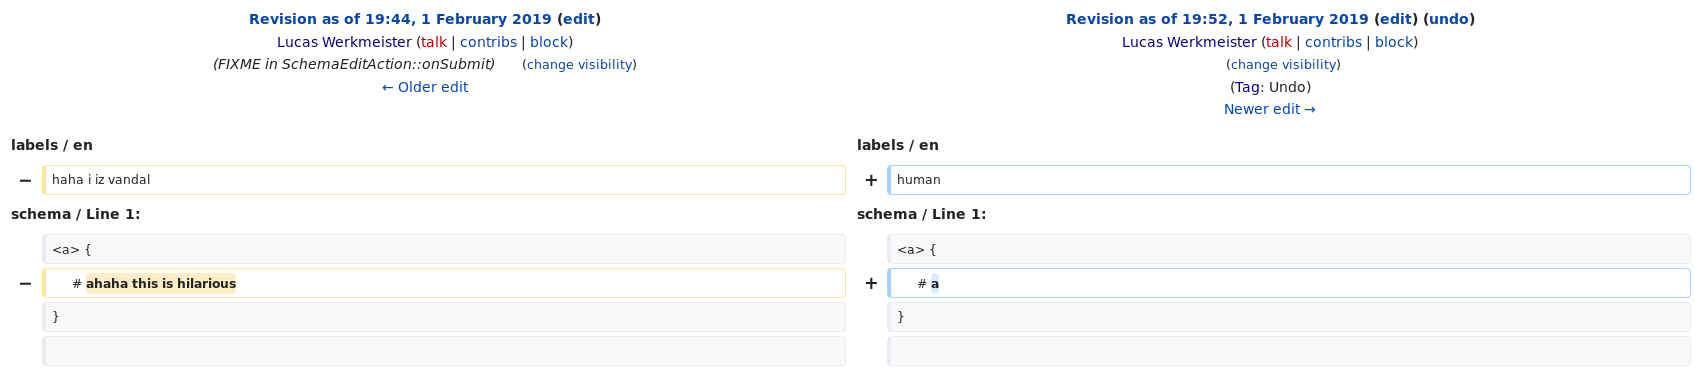 Screenshot_2019-02-14 Difference between revisions of Schema O1 - wiki1.png (369×1 px, 28 KB)